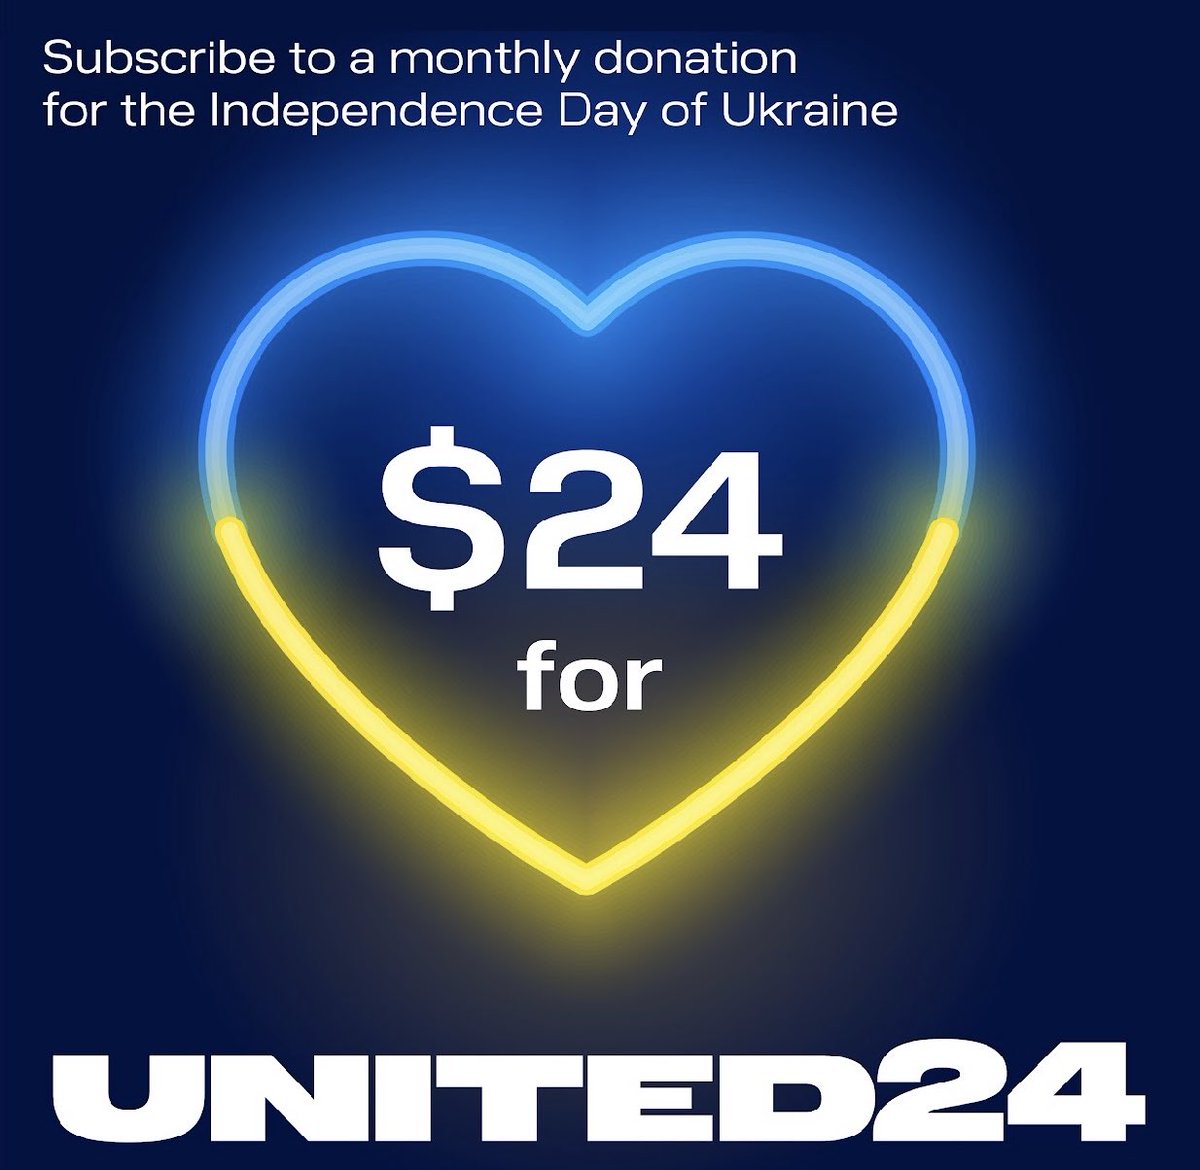 Today is Independence Day of Ukraine, and the sixth month of the ongoing war. Please join me in supporting President Zelenskyy’s 24,000 Friends of Ukraine Project. By donating $24 to United24 you will help to provide wounded Ukrainians with medical aid.